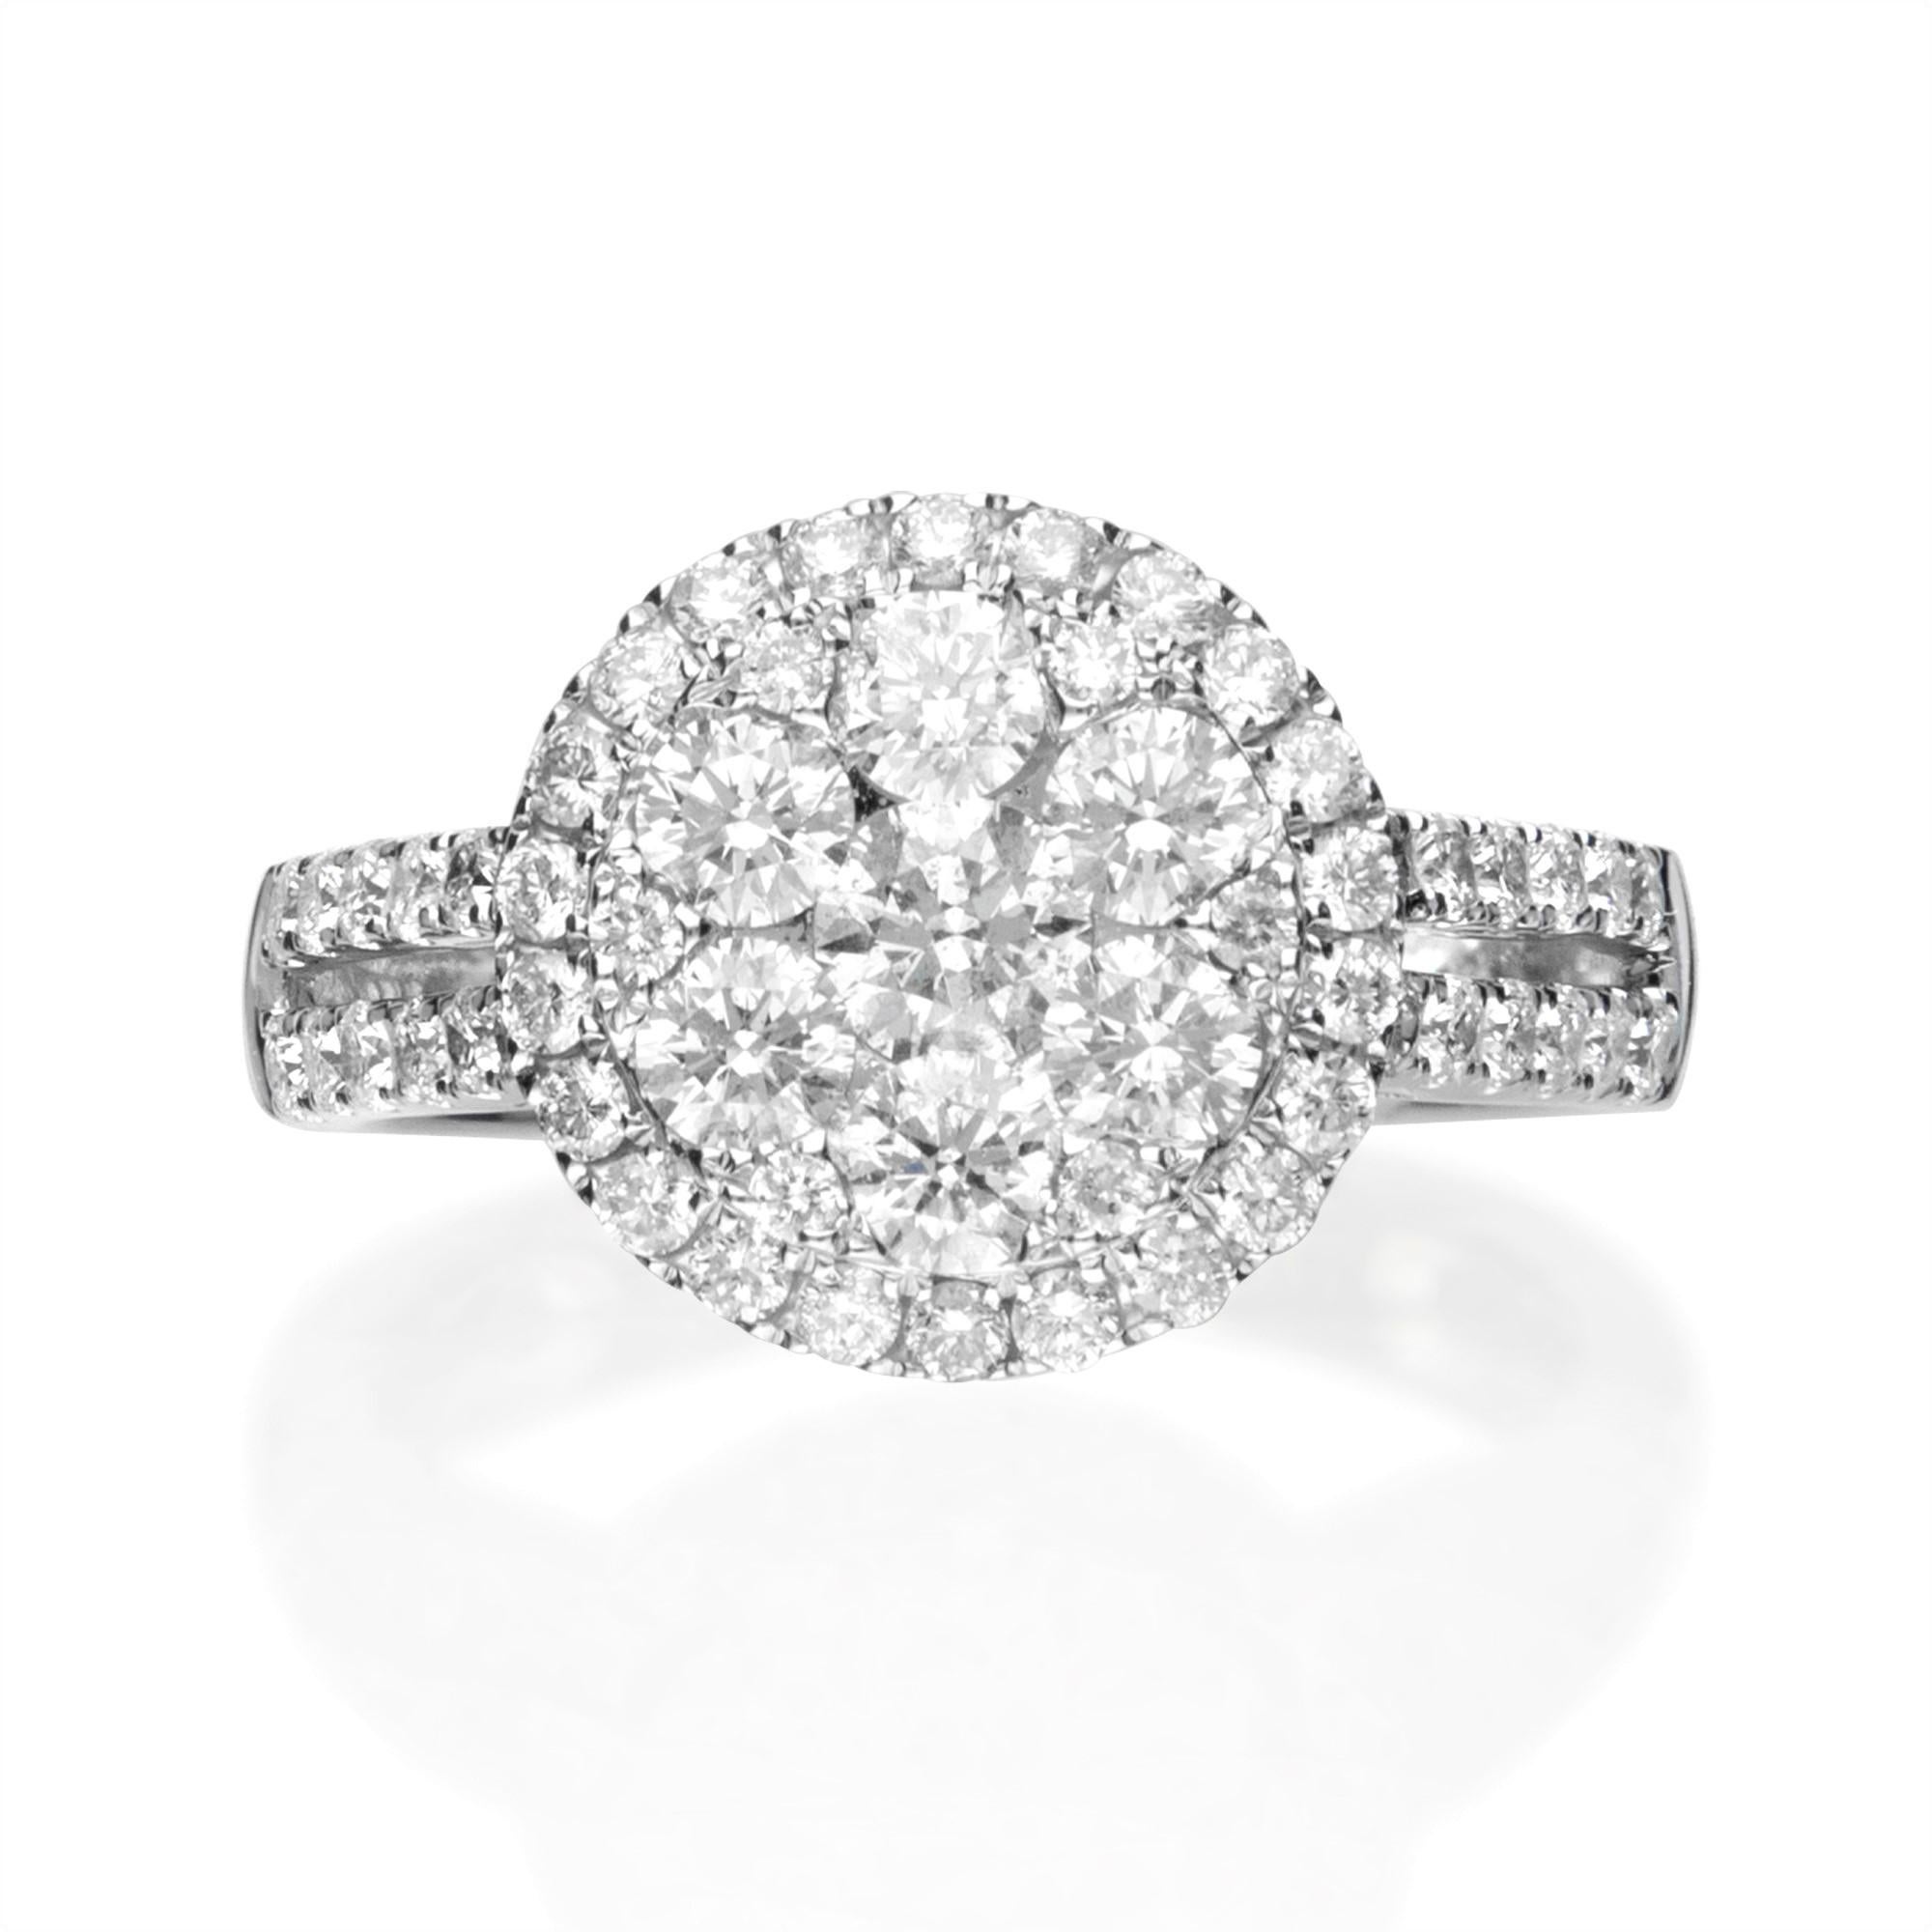 This unique Cluster ring has 1 Round Diamond that weighs 0.29 Carats in the center, 6 diamonds 1.12 ct. and 54 diamonds around it 0.79 ct., all with GH-SI quality. The Cluster setting gives a big Diamond ring look and it is a perfect engagement ring